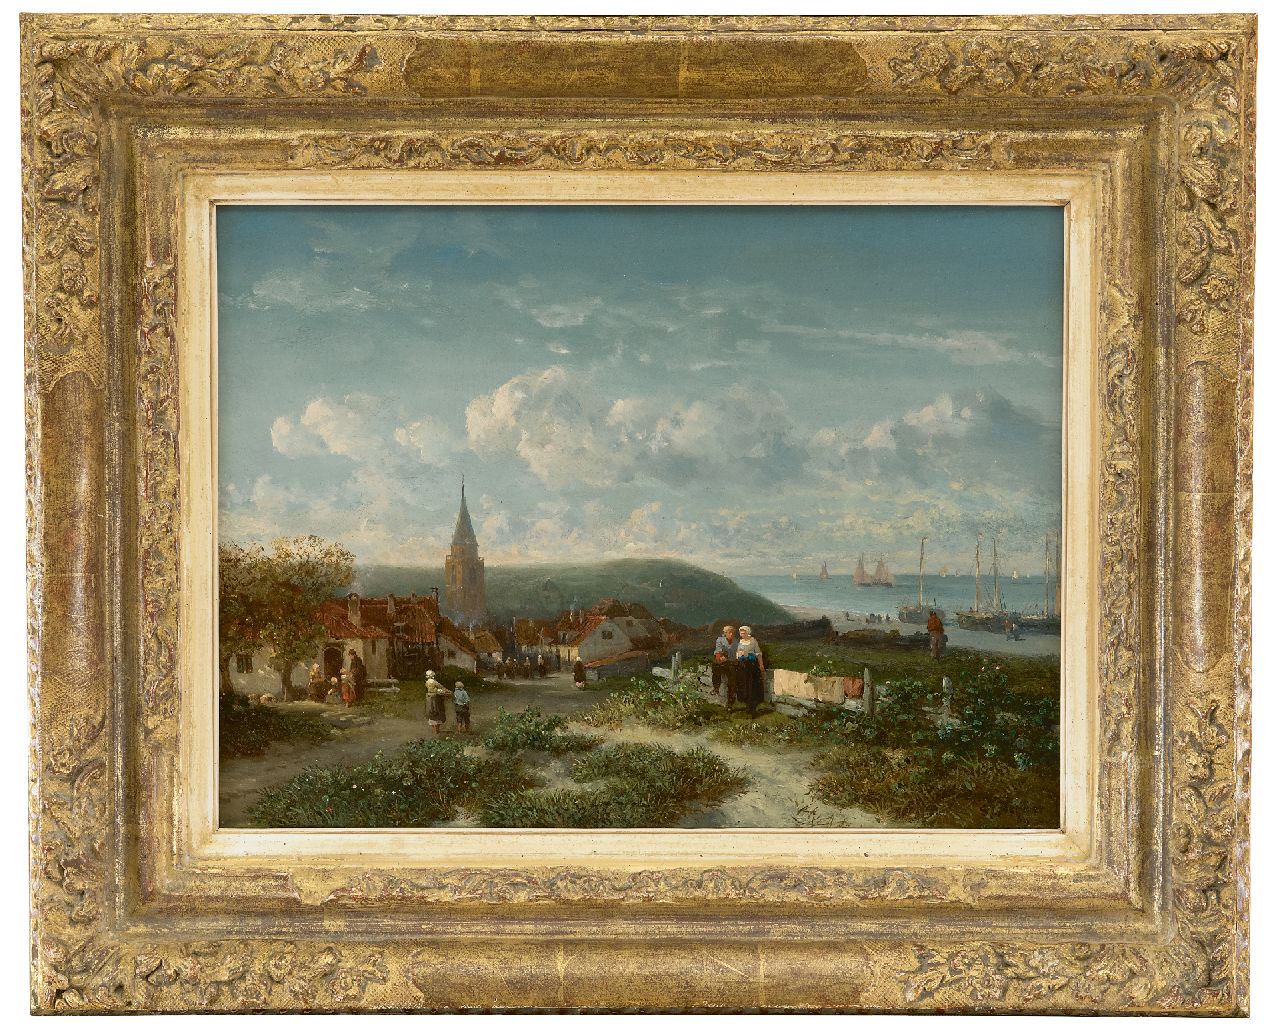 Verveer S.L.  | 'Salomon' Leonardus Verveer | Paintings offered for sale | Panoramic view of the fishing village of Scheveningen and the beach, oil on panel 24.1 x 33.7 cm, signed l.r. and dated '64